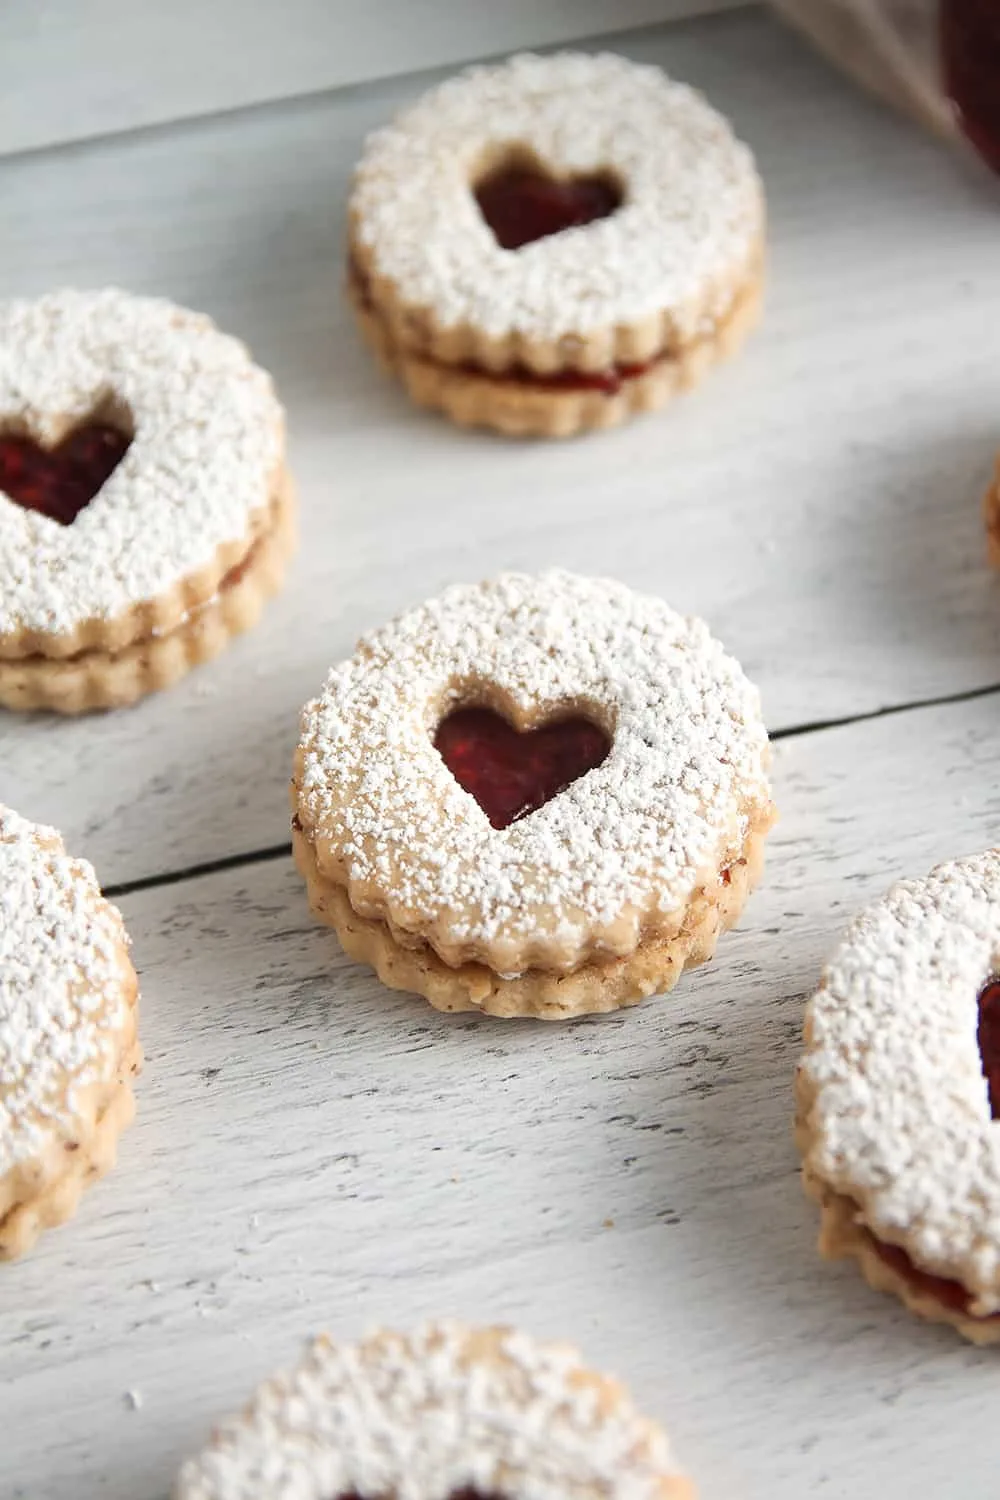 Raspberry jam gets sandwiched between two almond cookies to make traditional Raspberry Linzer Cookies.